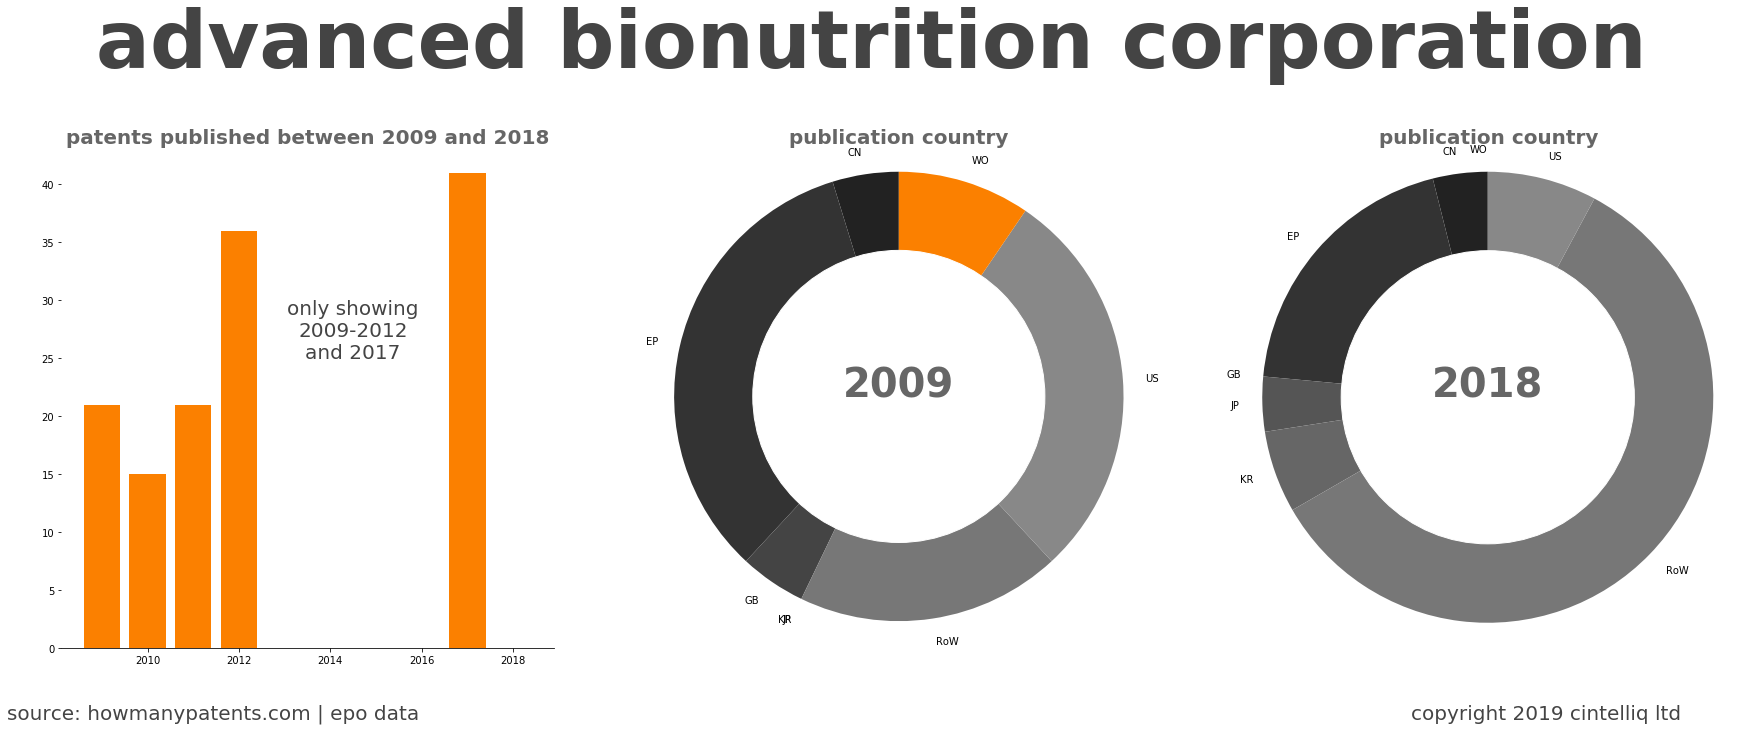 summary of patents for Advanced Bionutrition Corporation